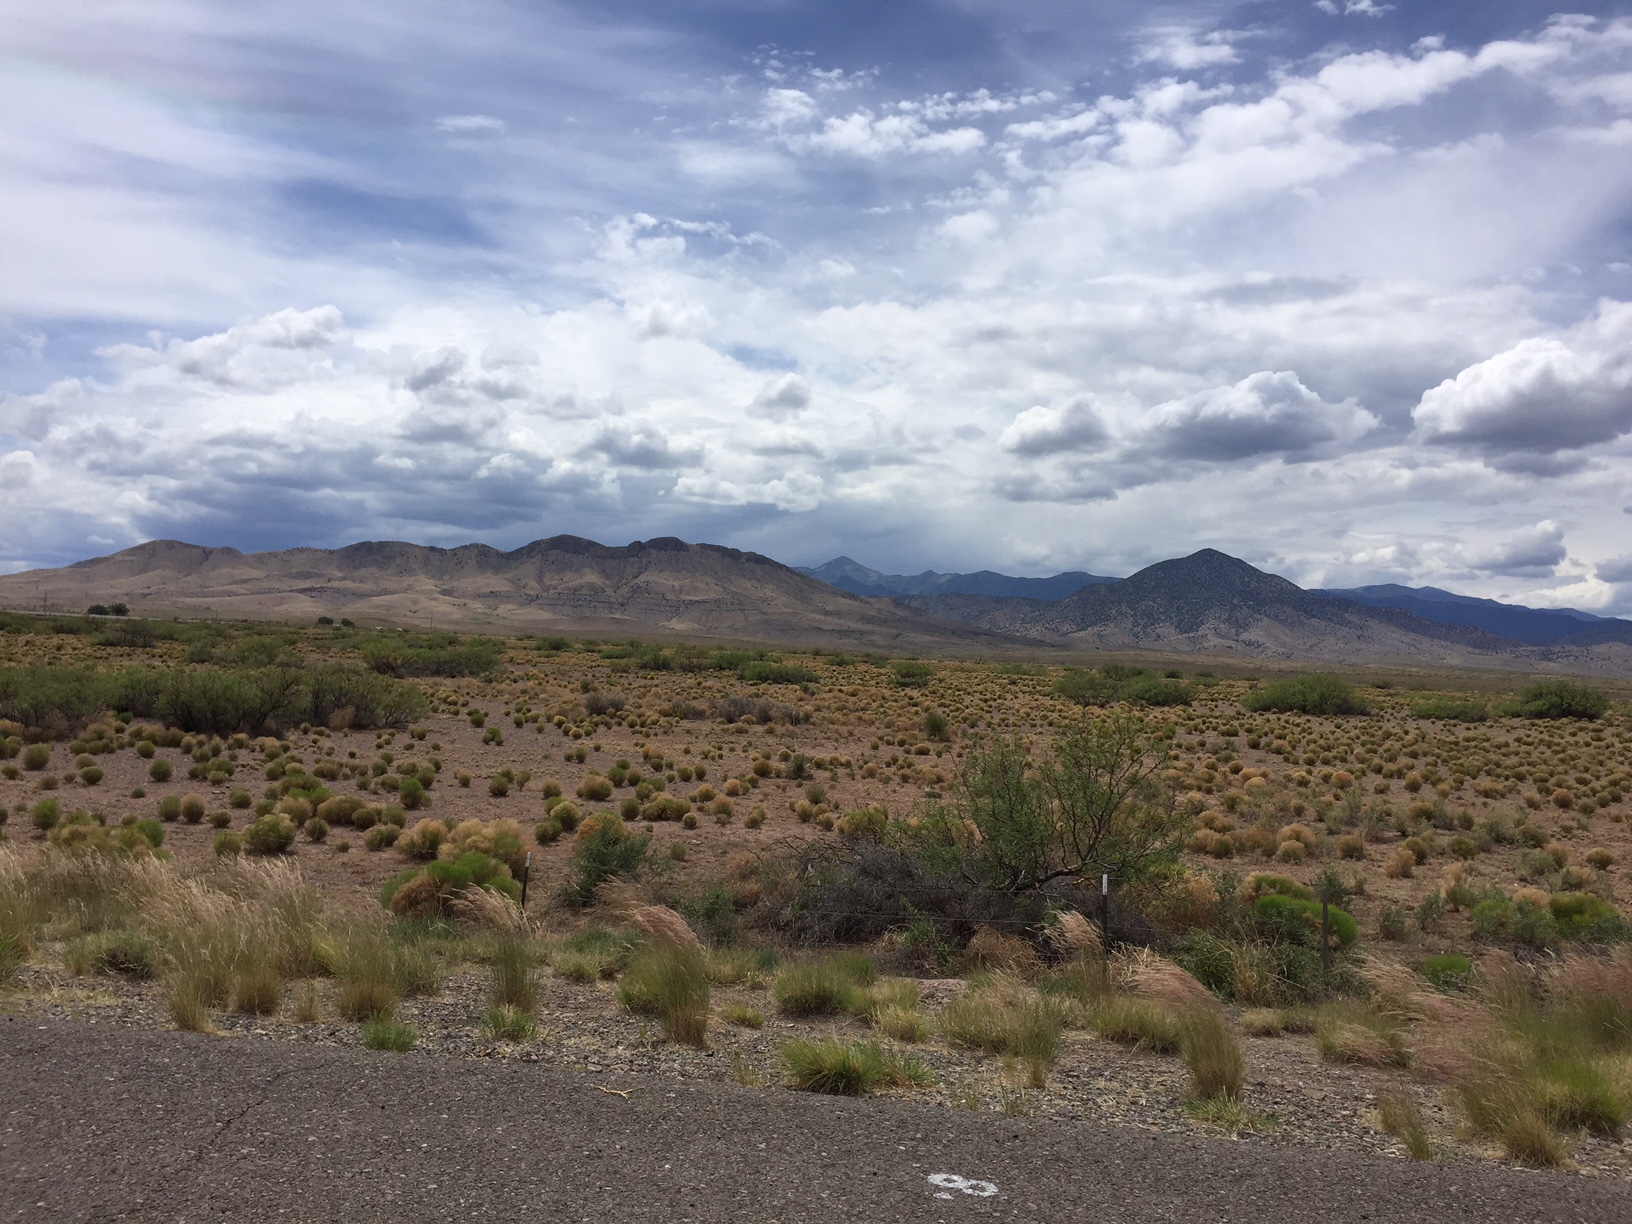 Desert scrubland in the foreground leads to dark mountains in the far background